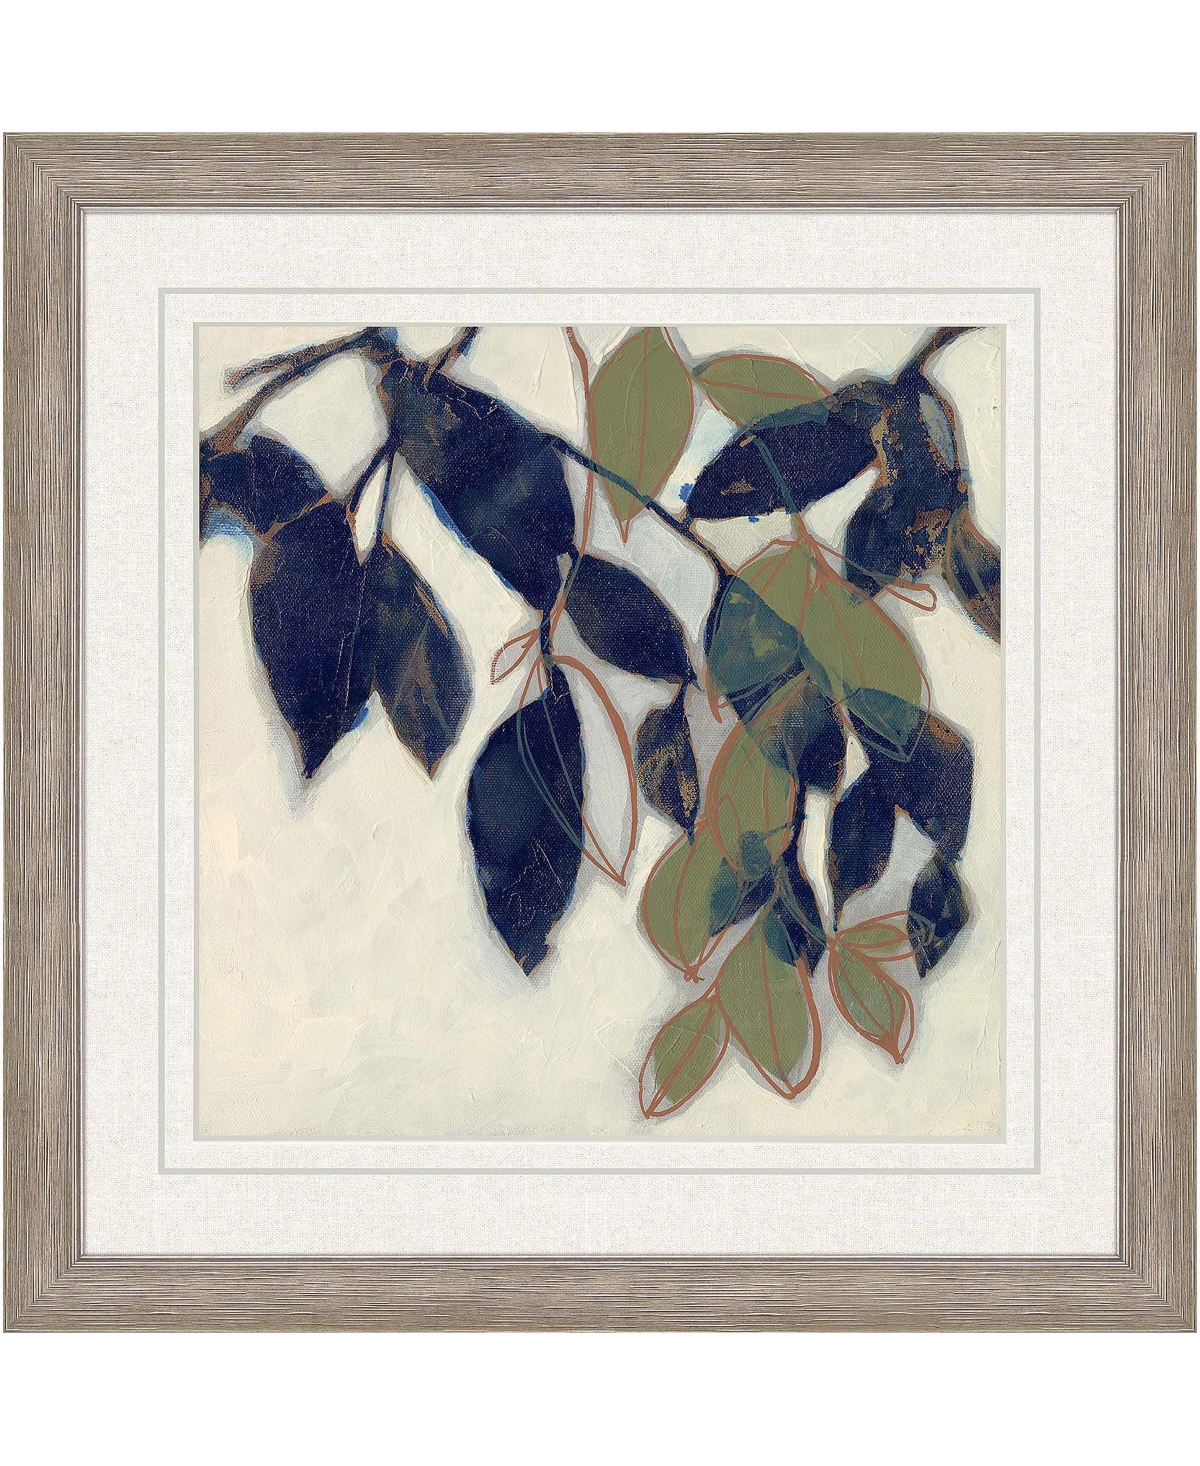 Paragon Picture Gallery Entwined Leaves Ii Framed Art In Blue